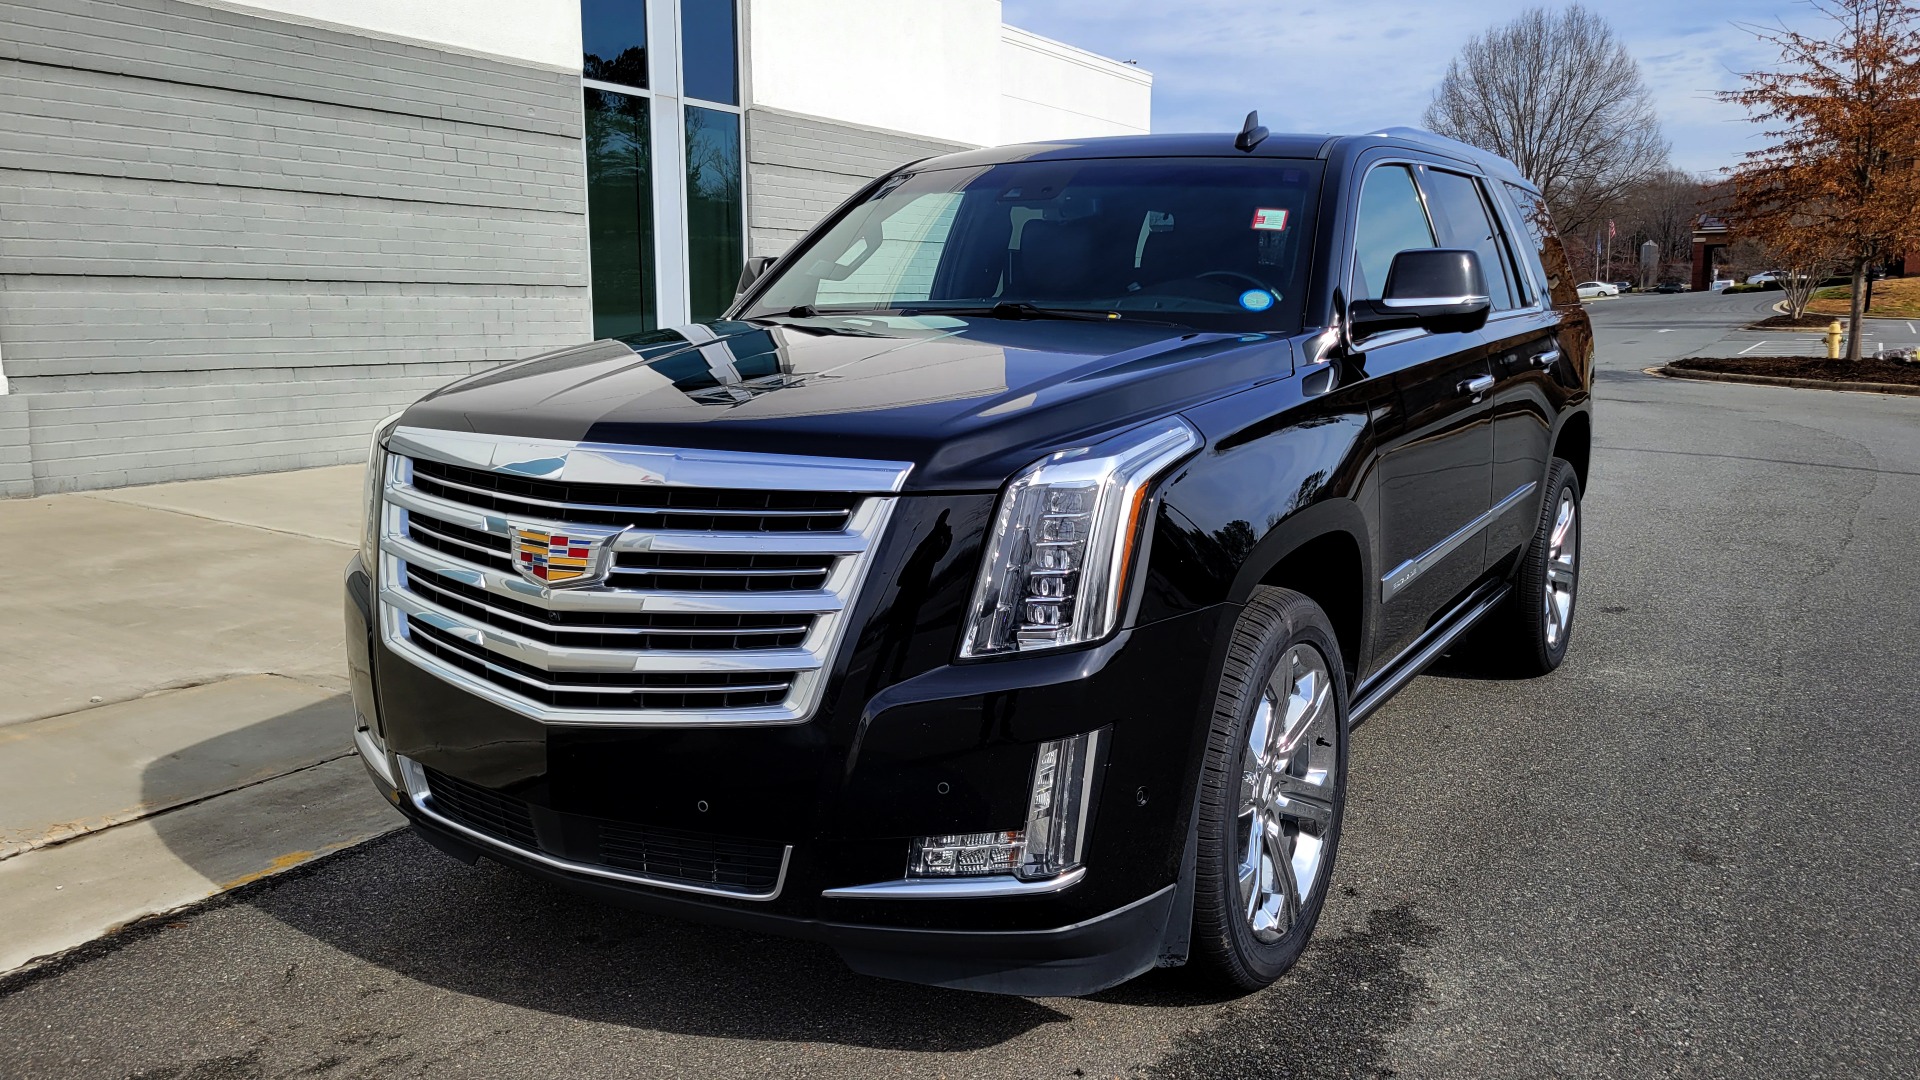 Used 2017 Cadillac ESCALADE PLATINUM 4WD / 6.2L / 8-SPD AUTO / NAV / SUNROOF / DVD / 3-ROW for sale Sold at Formula Imports in Charlotte NC 28227 1